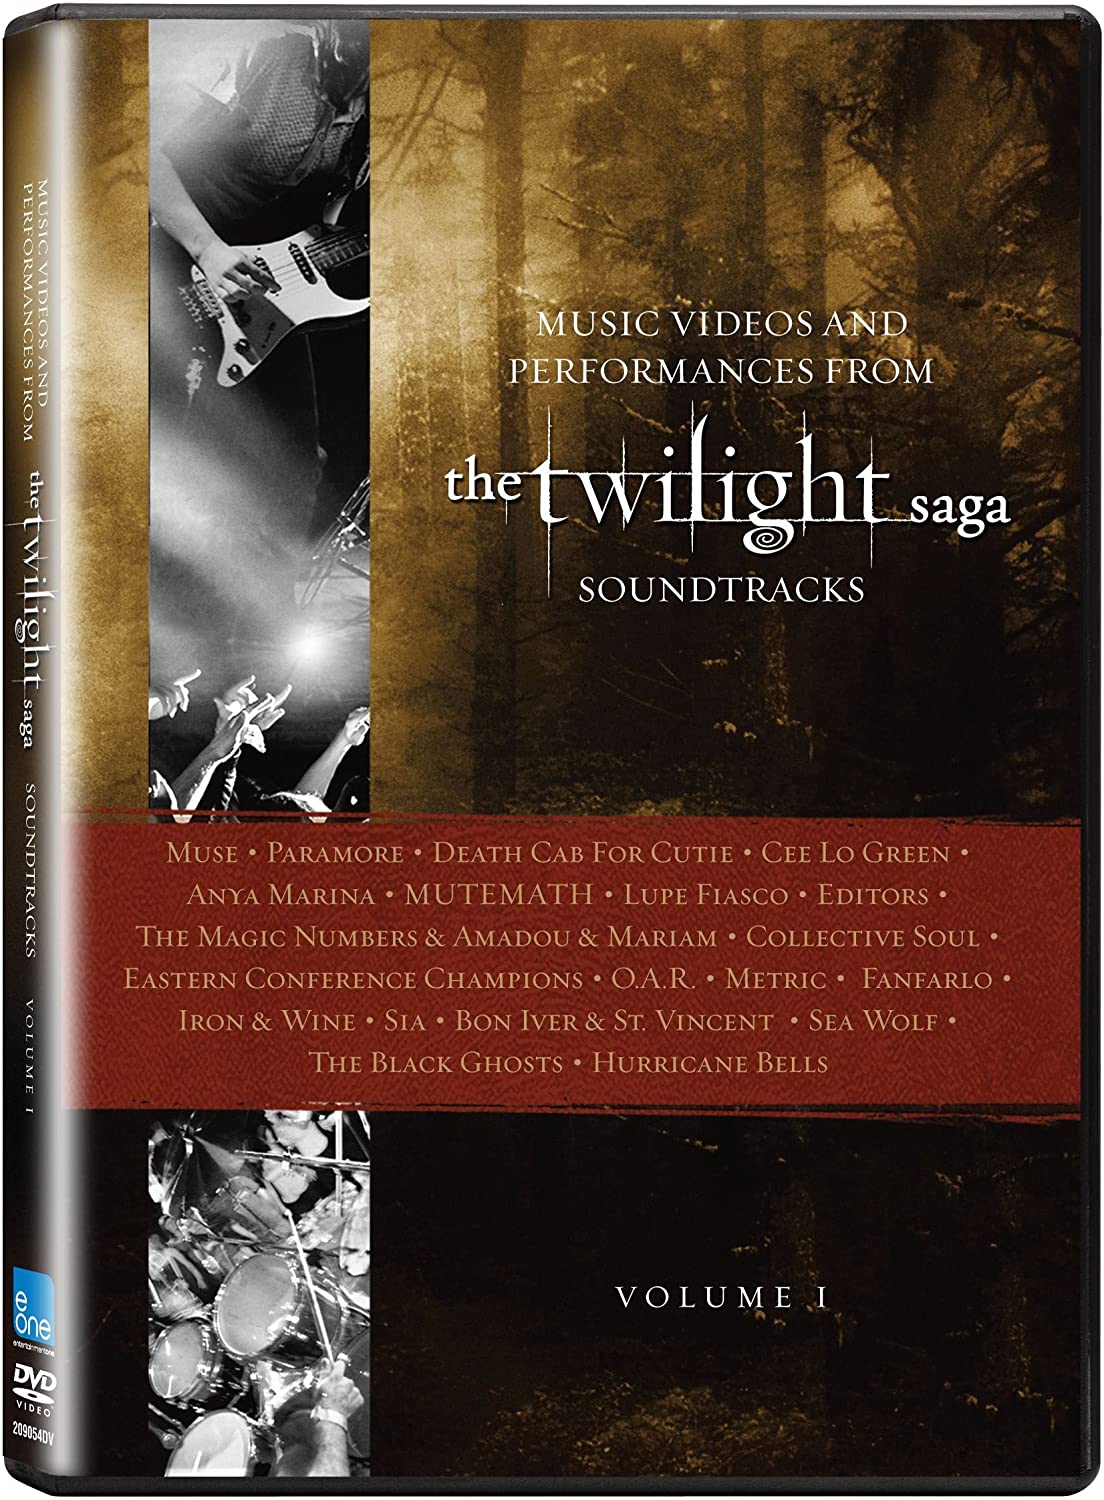 The Twilight Saga: Music Videos and Performances from the Soundtracks/ Volume One [DVD]